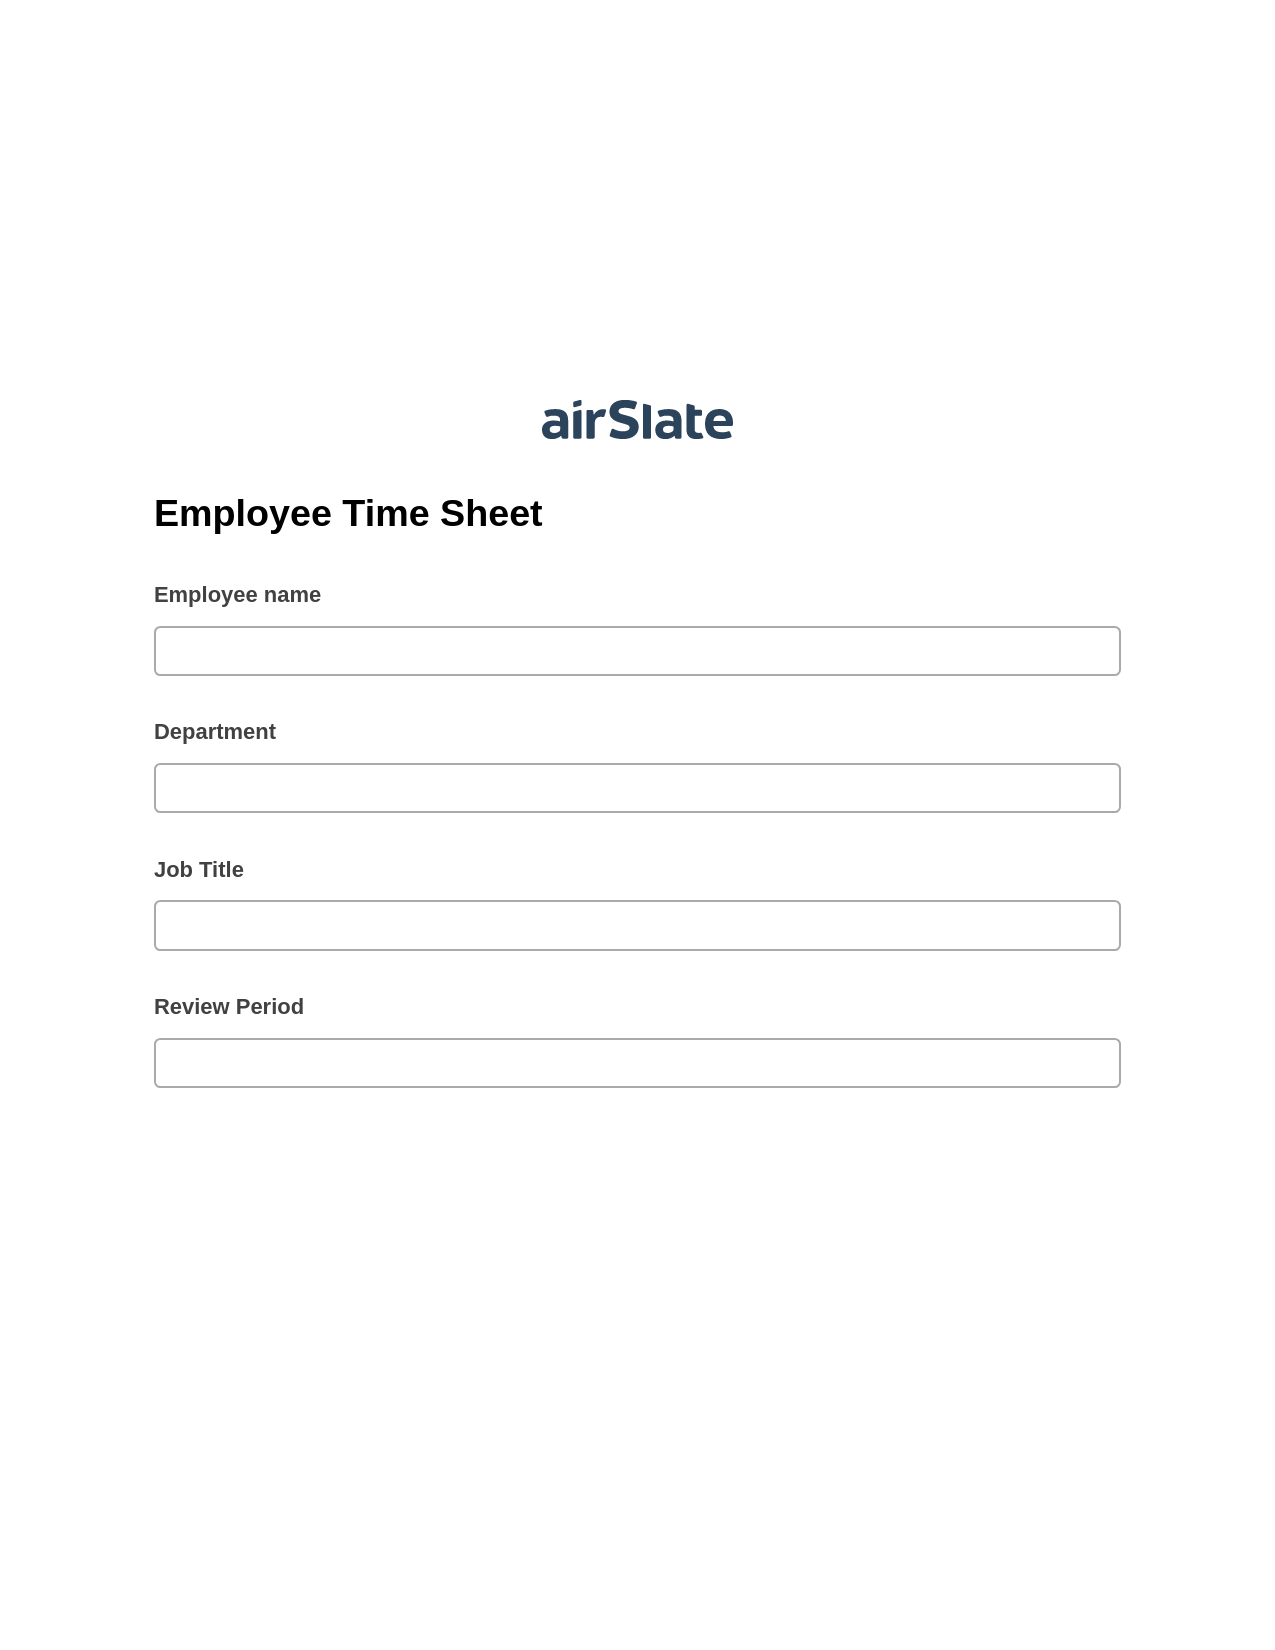 Multirole Employee Time Sheet Pre-fill from another Slate Bot, Create slate from another Flow Bot, Webhook Postfinish Bot